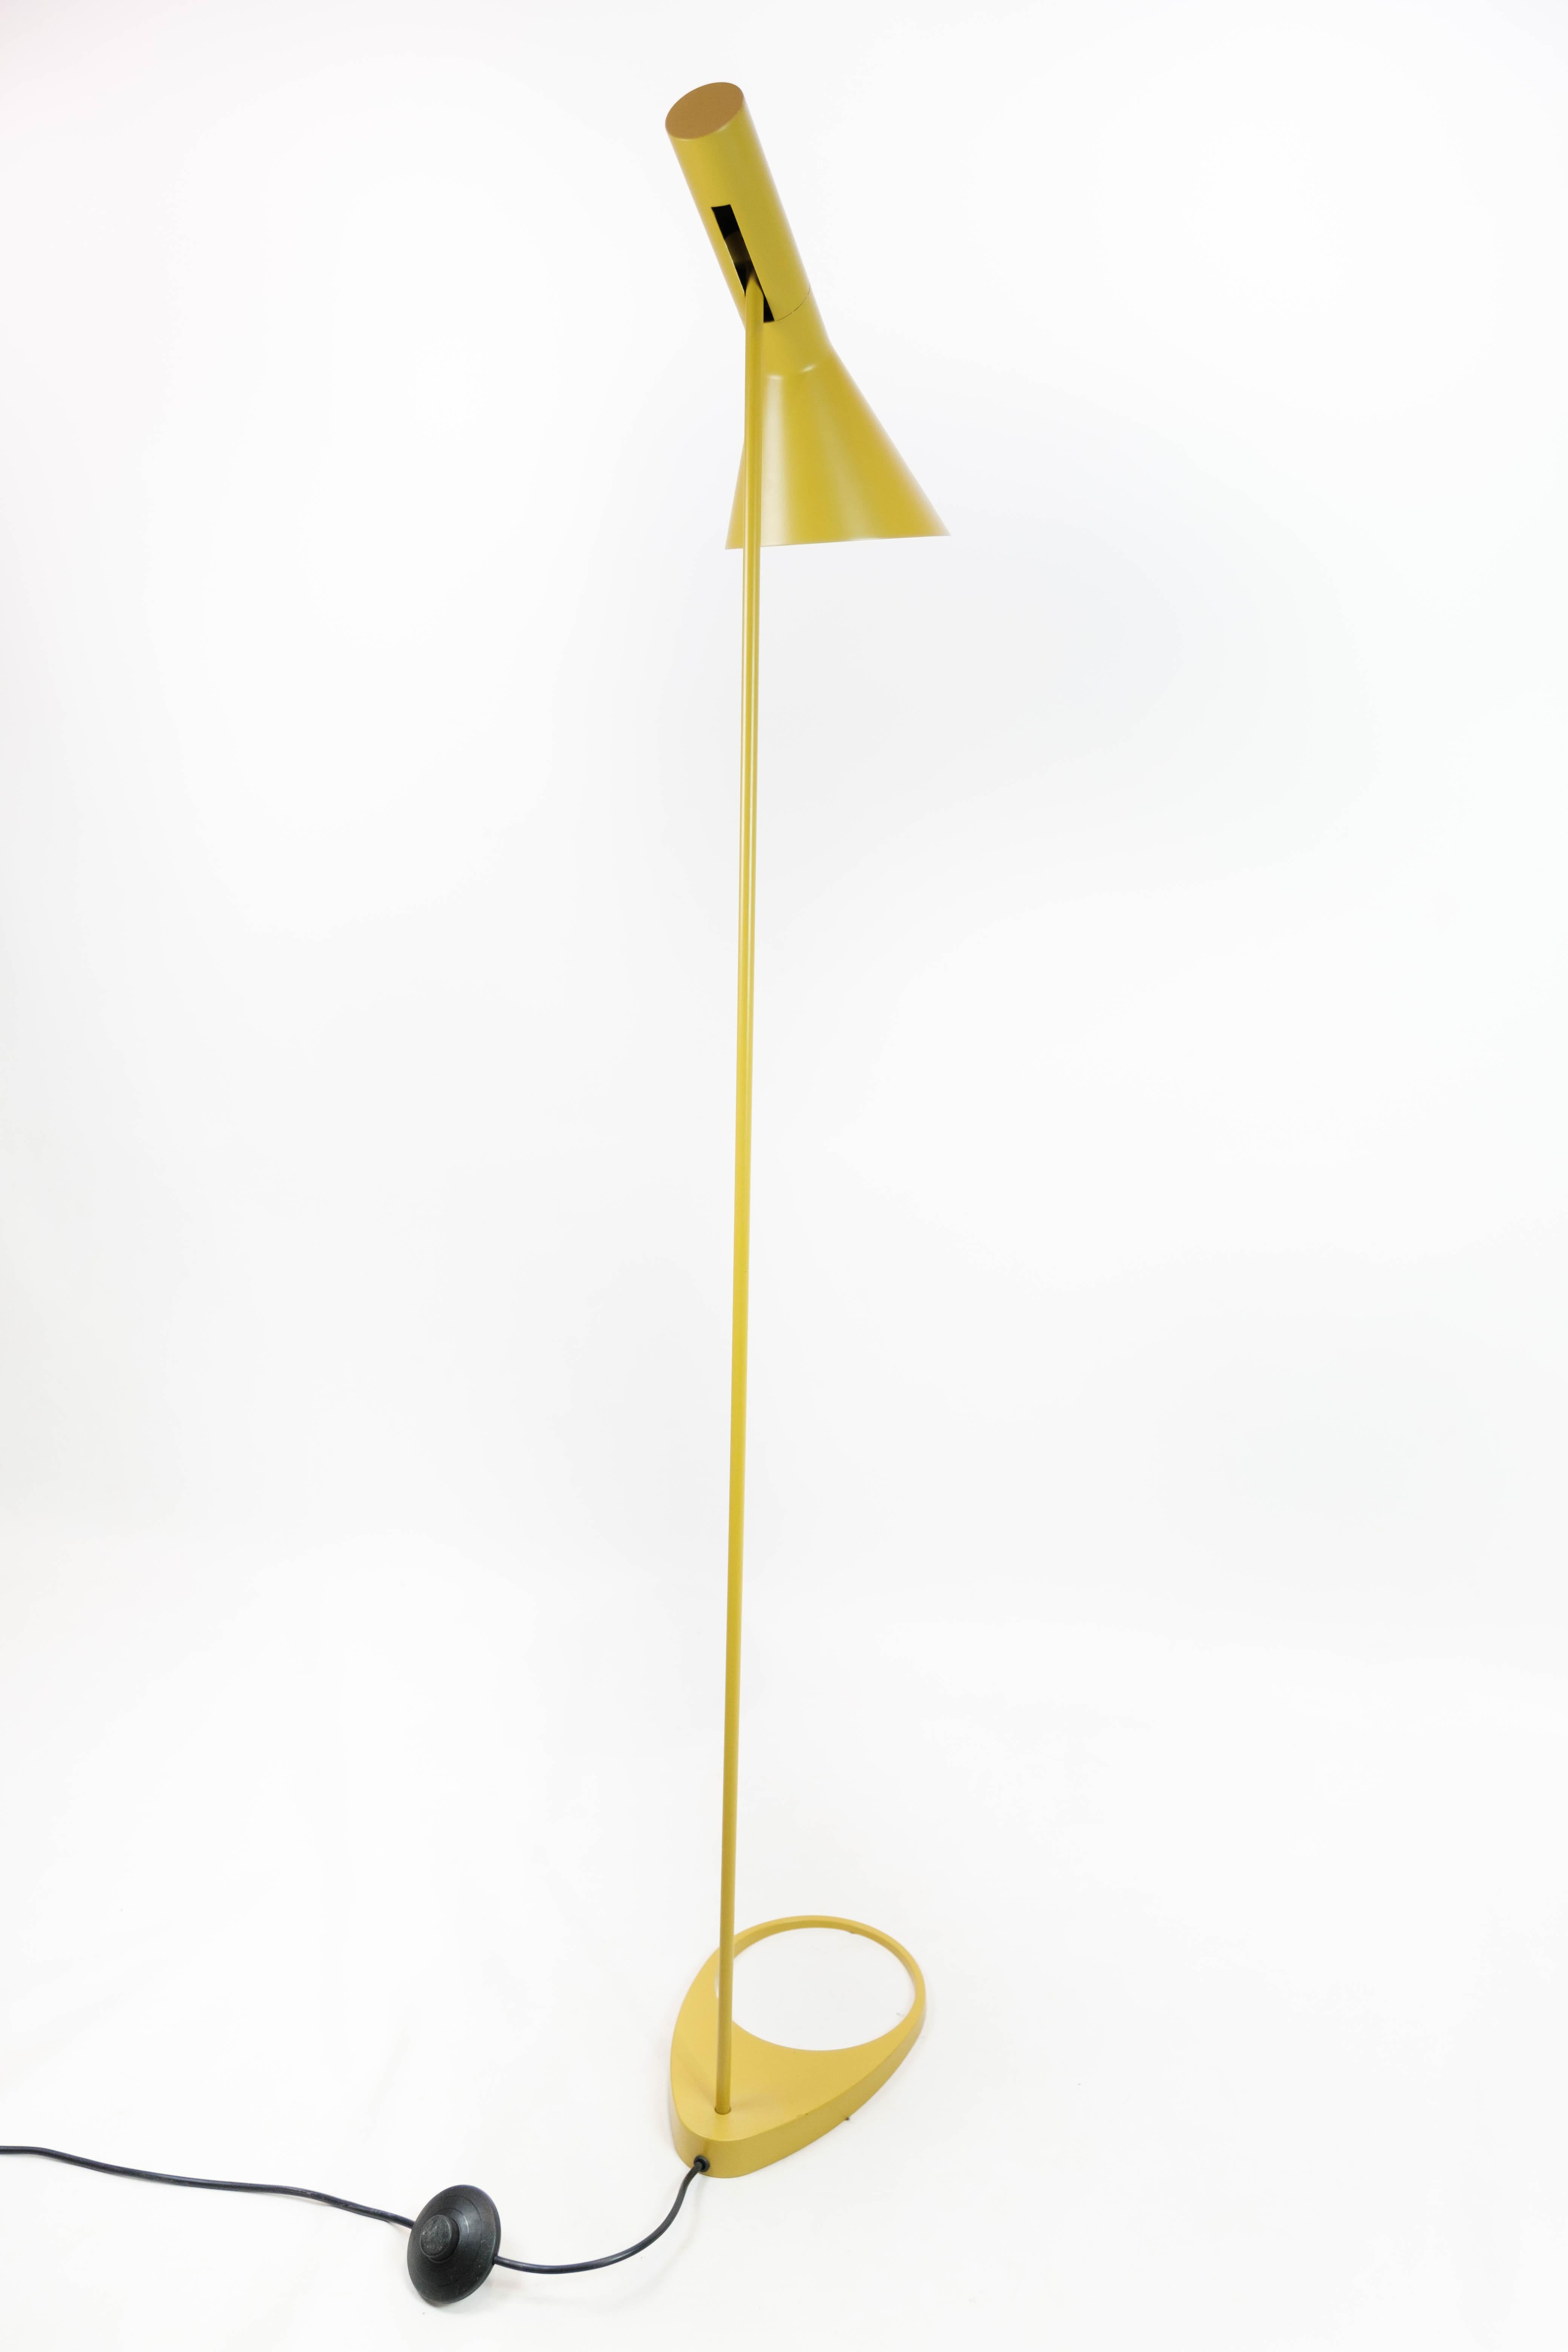 Lacquered Yellow Floor Lamp Designed by Arne Jacobsen and Manufactured by Louis Poulsen